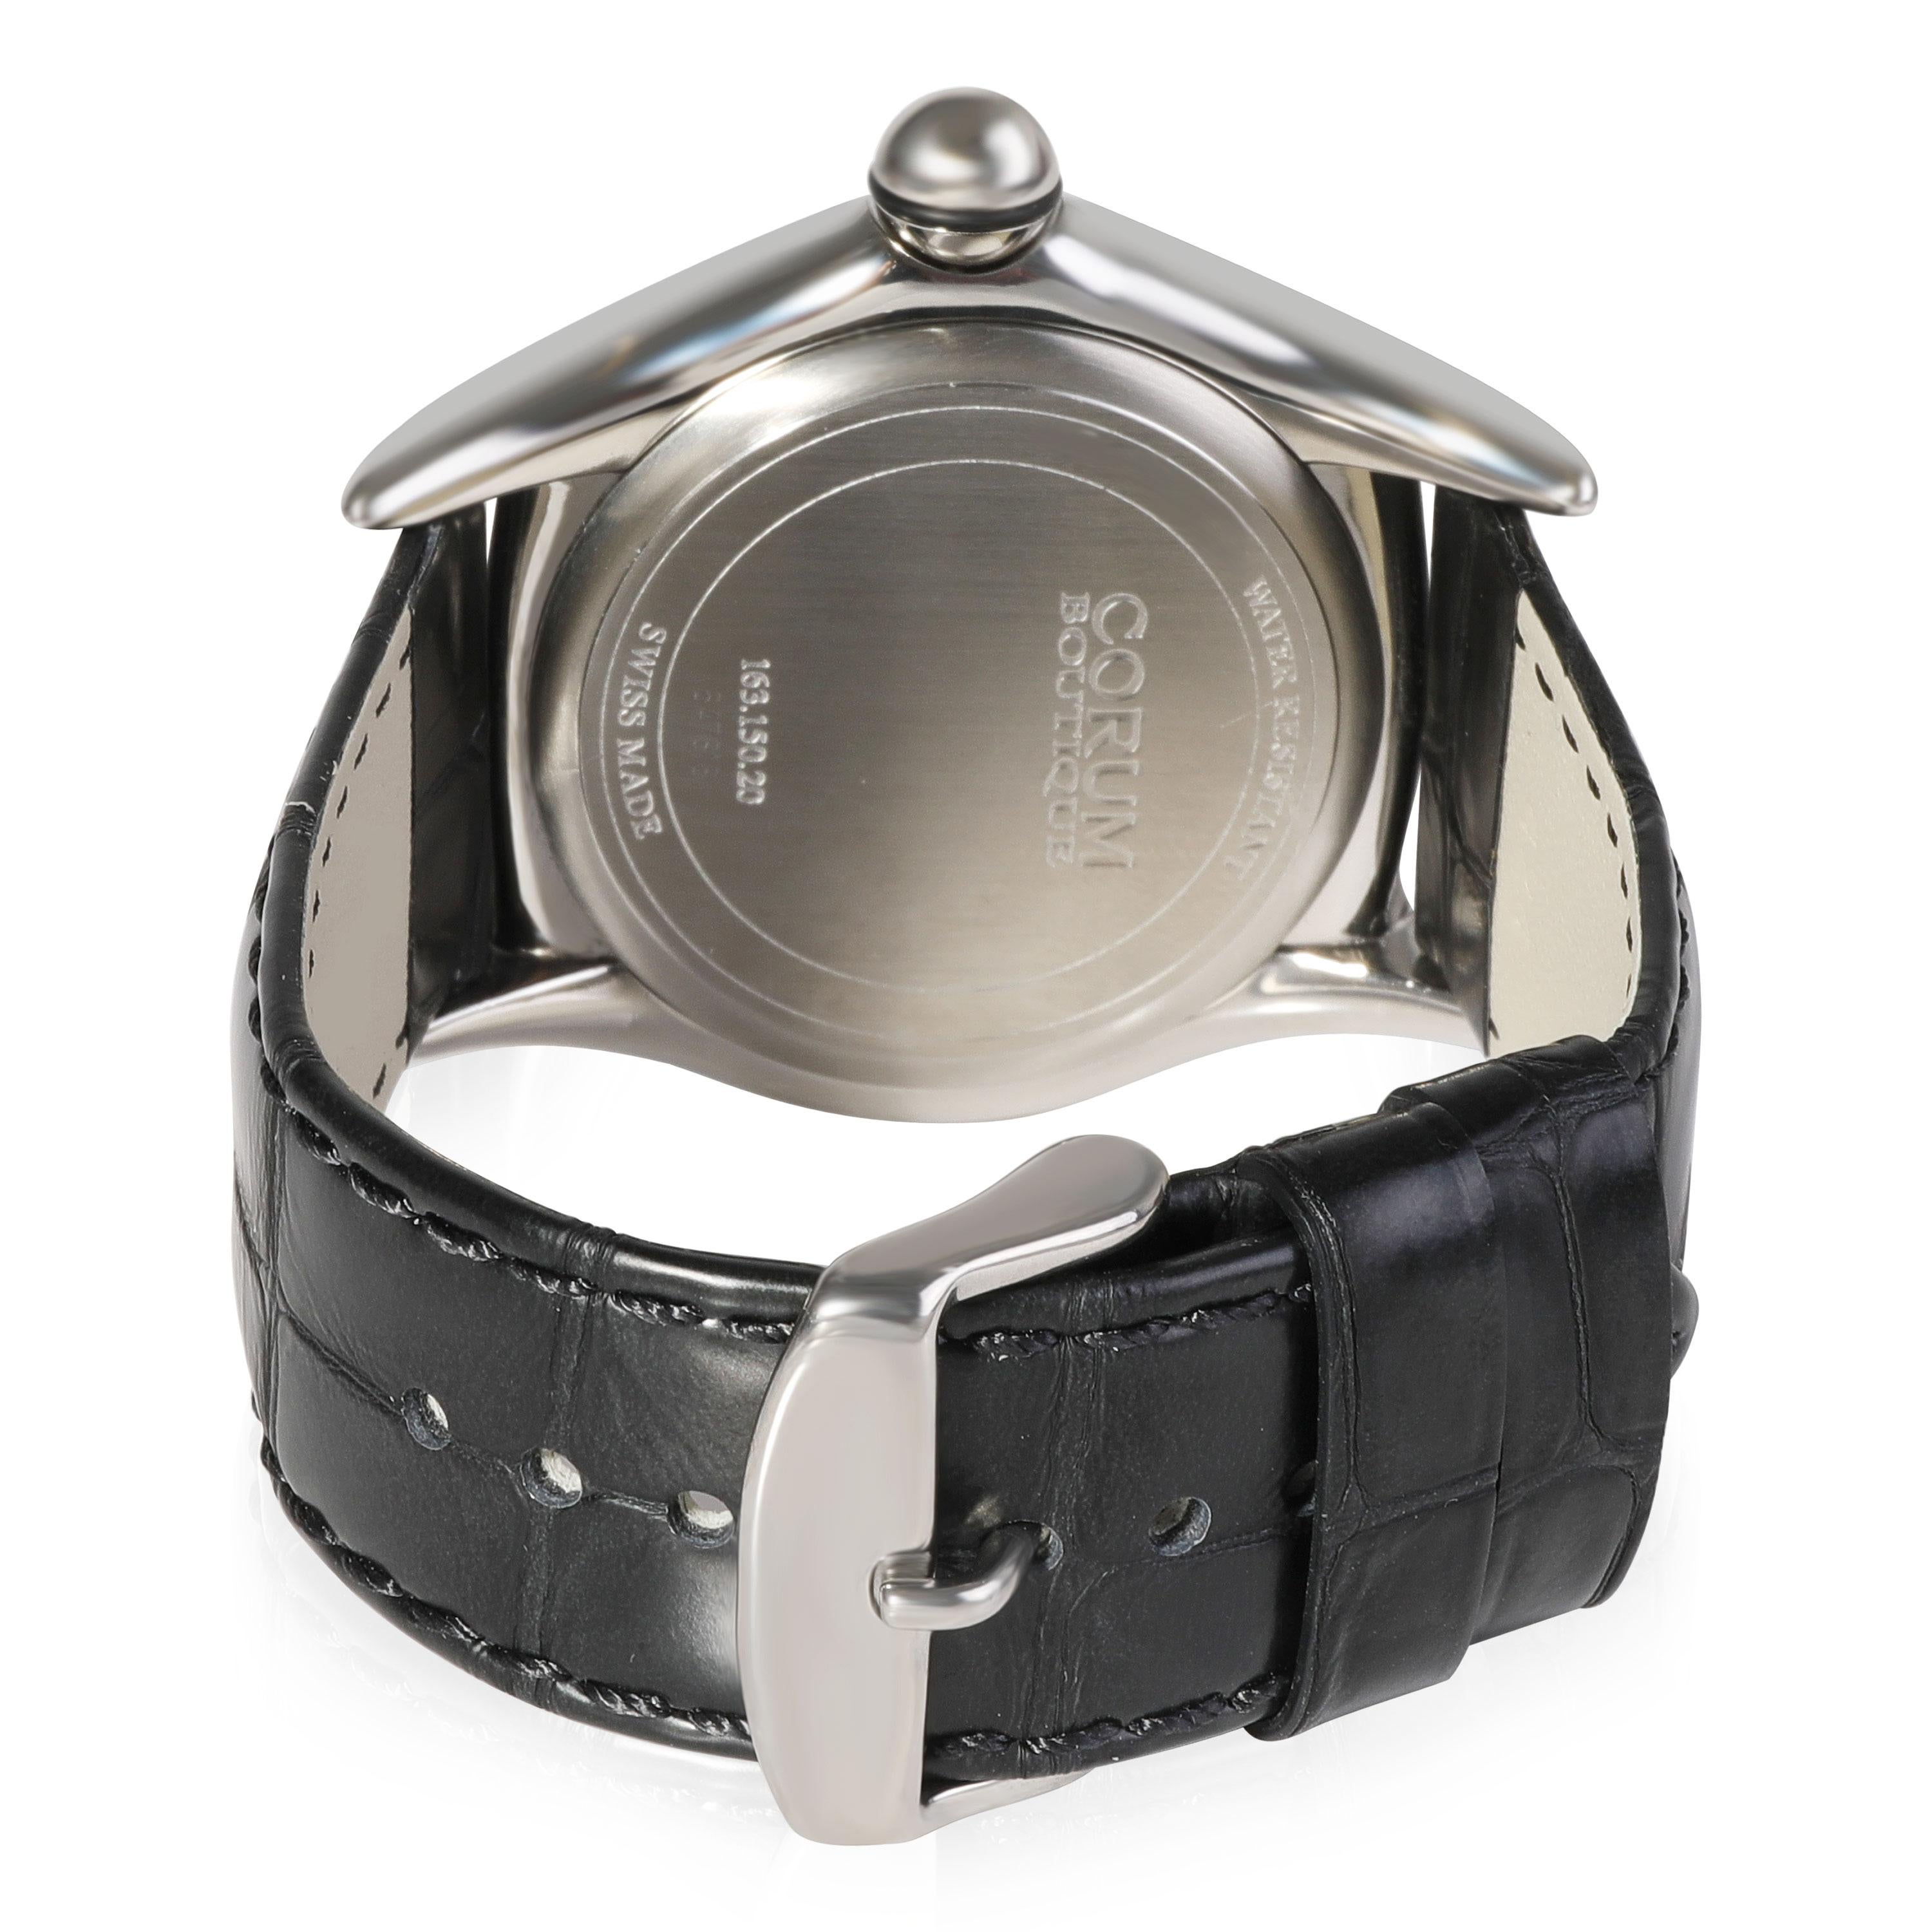 Corum Bubble 163.150.20 Men's Watch in  Stainless Steel

SKU: 113386

PRIMARY DETAILS
Brand: Corum
Model: Bubble
Country of Origin: Switzerland
Movement Type: Quartz: Battery
Year of Manufacture: 2000-2009
Condition: In excellent condition and